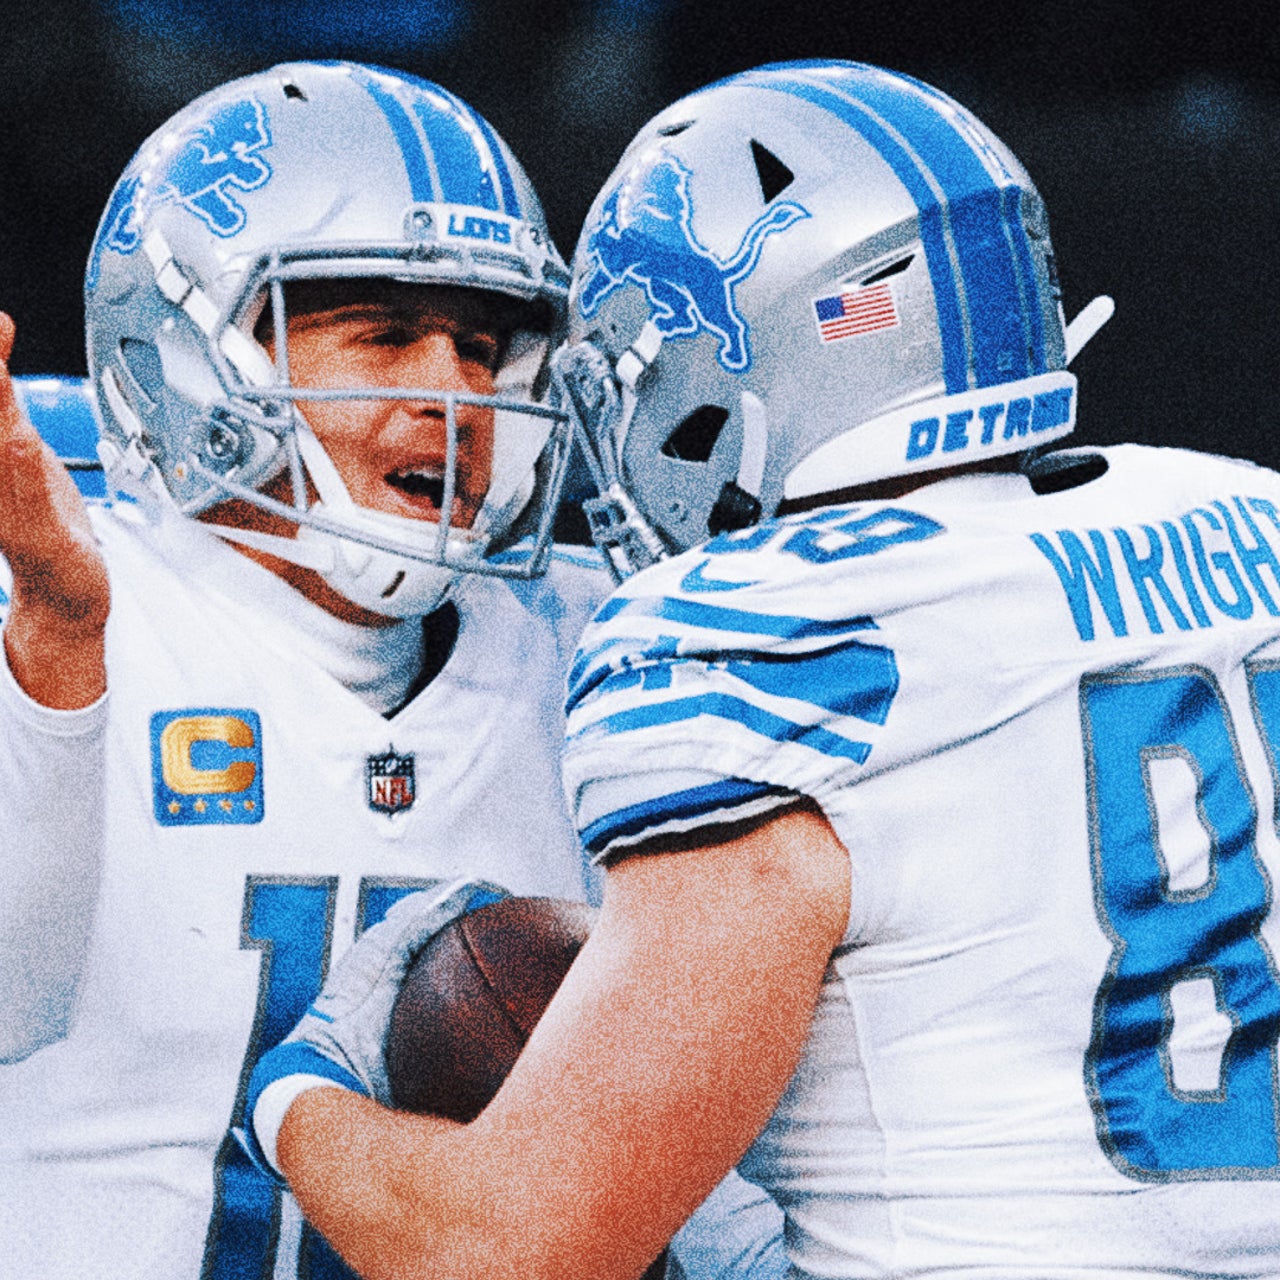 Lions' win drives playoff chances while Jets' hopes wane